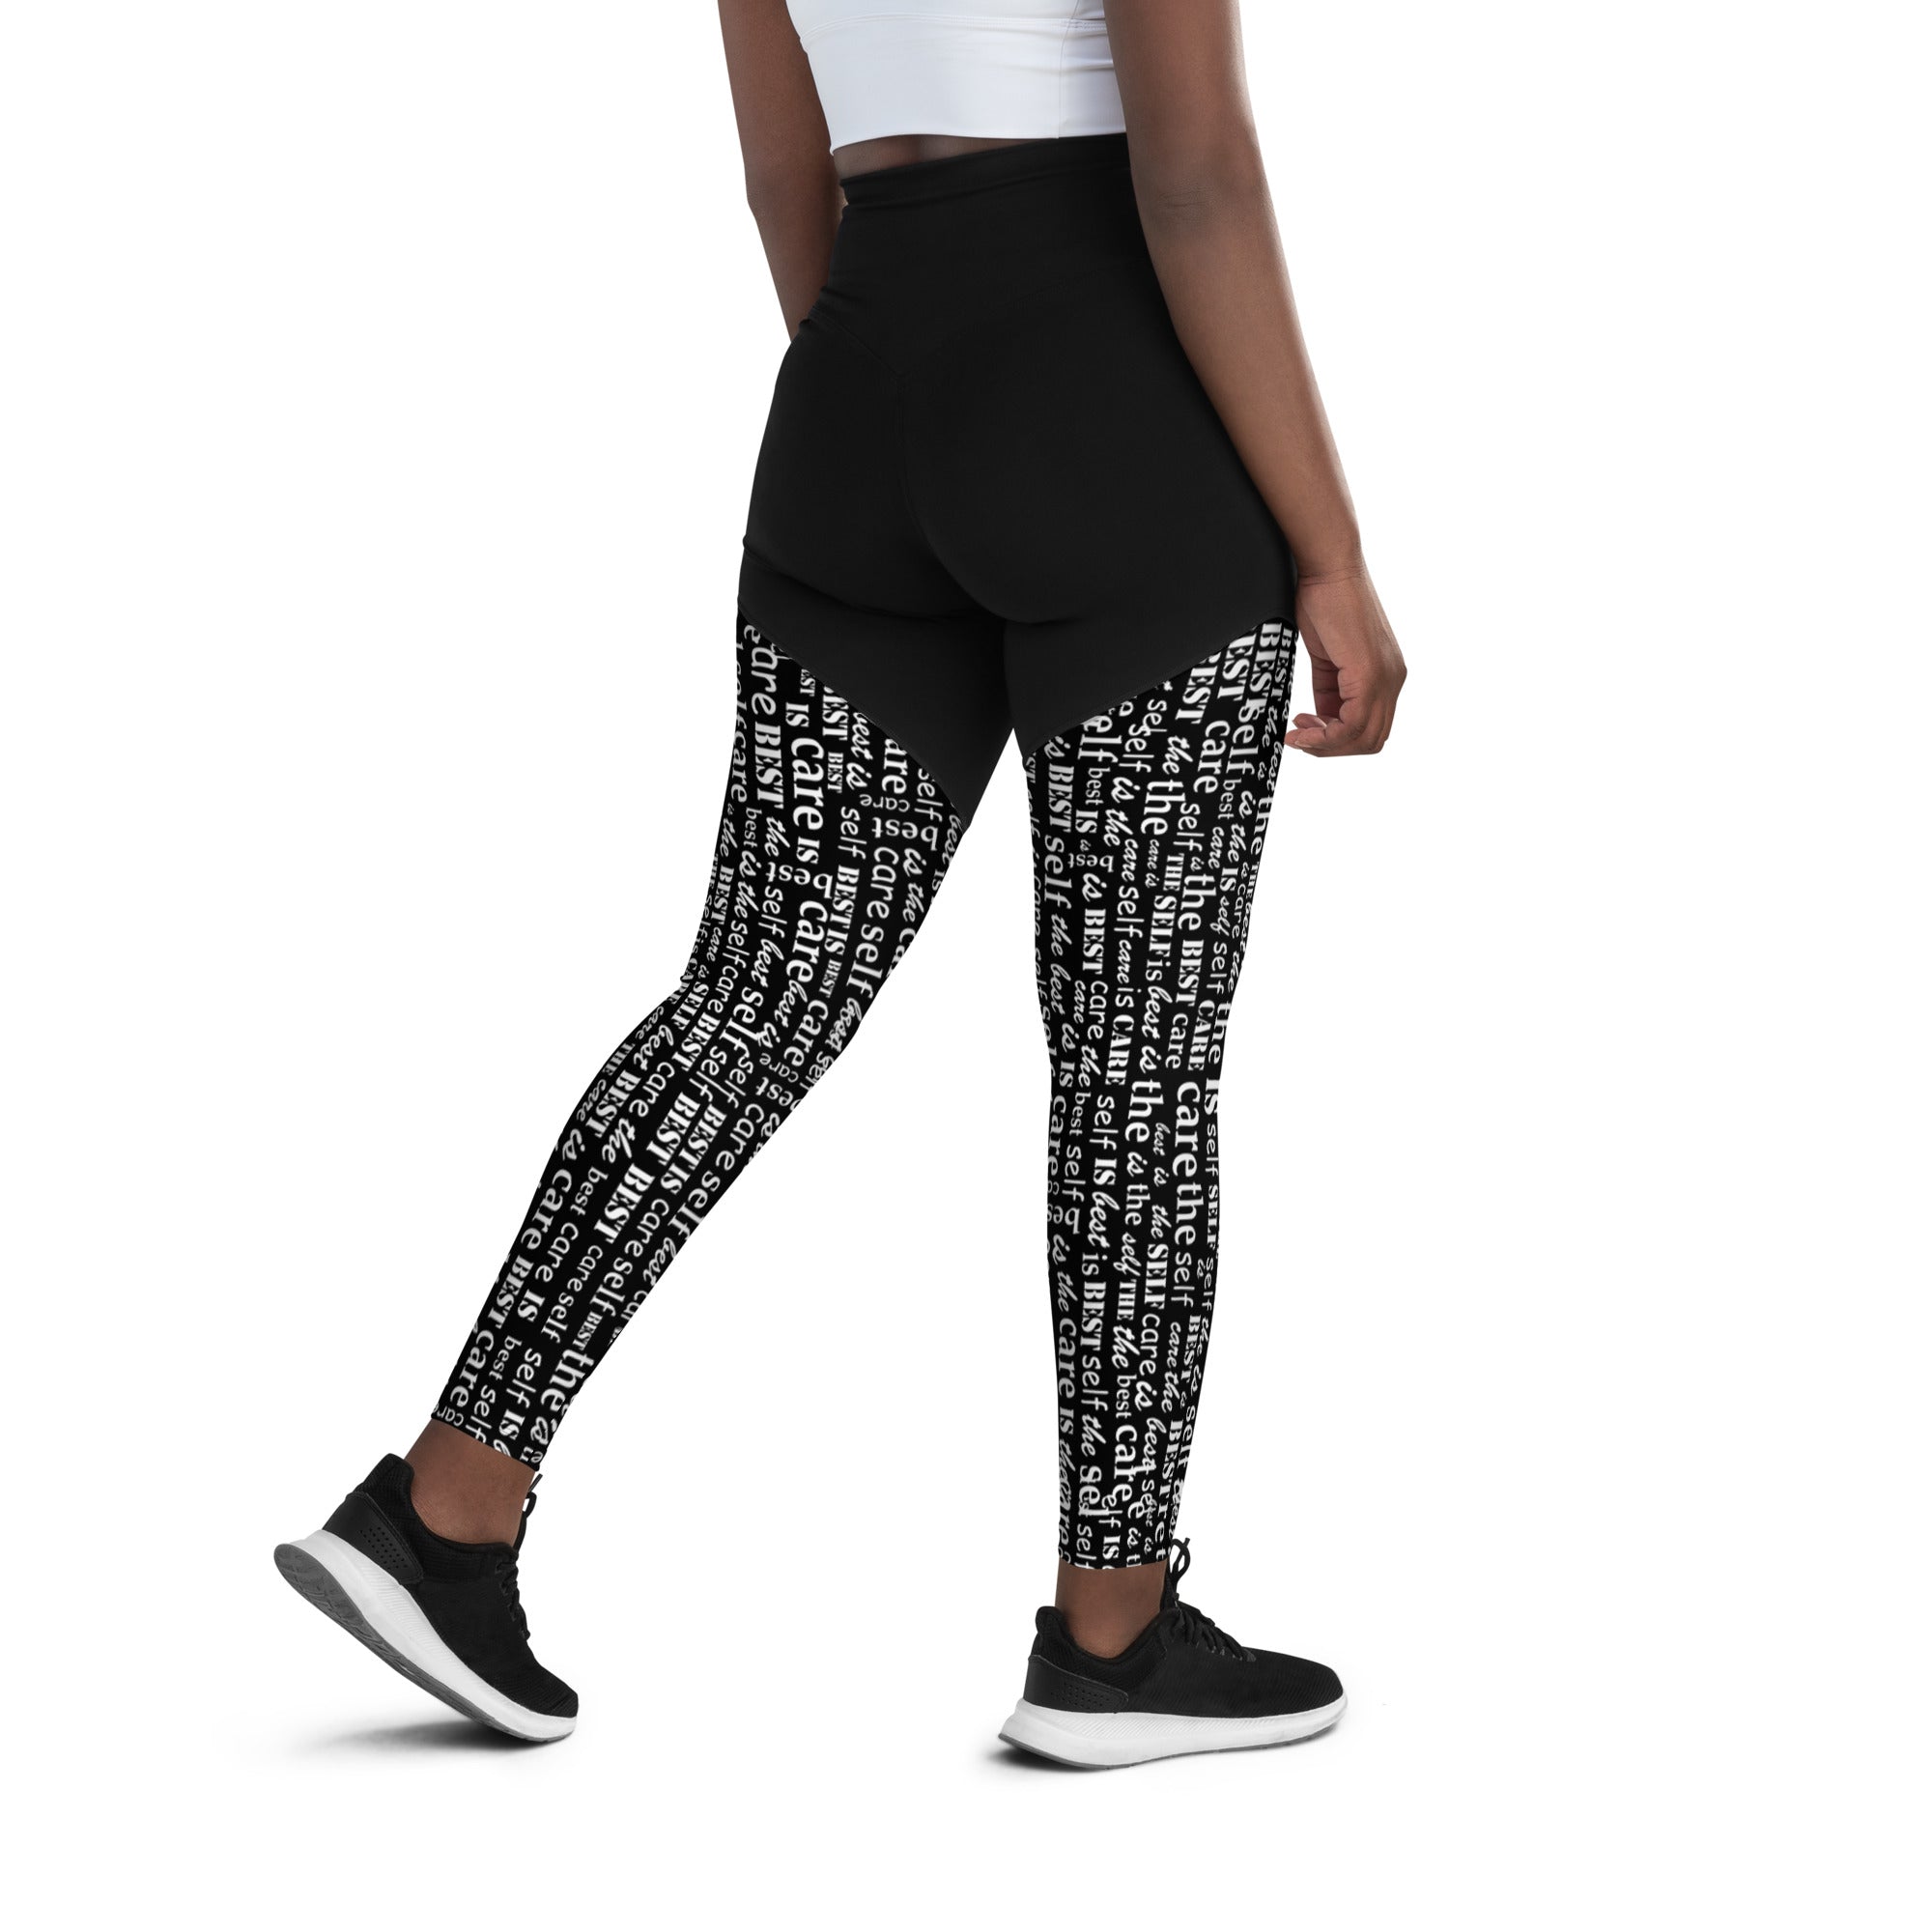 Bojoul Self Care Luxury Compression Sports Leggings (P) – THE BOJOUL STORE